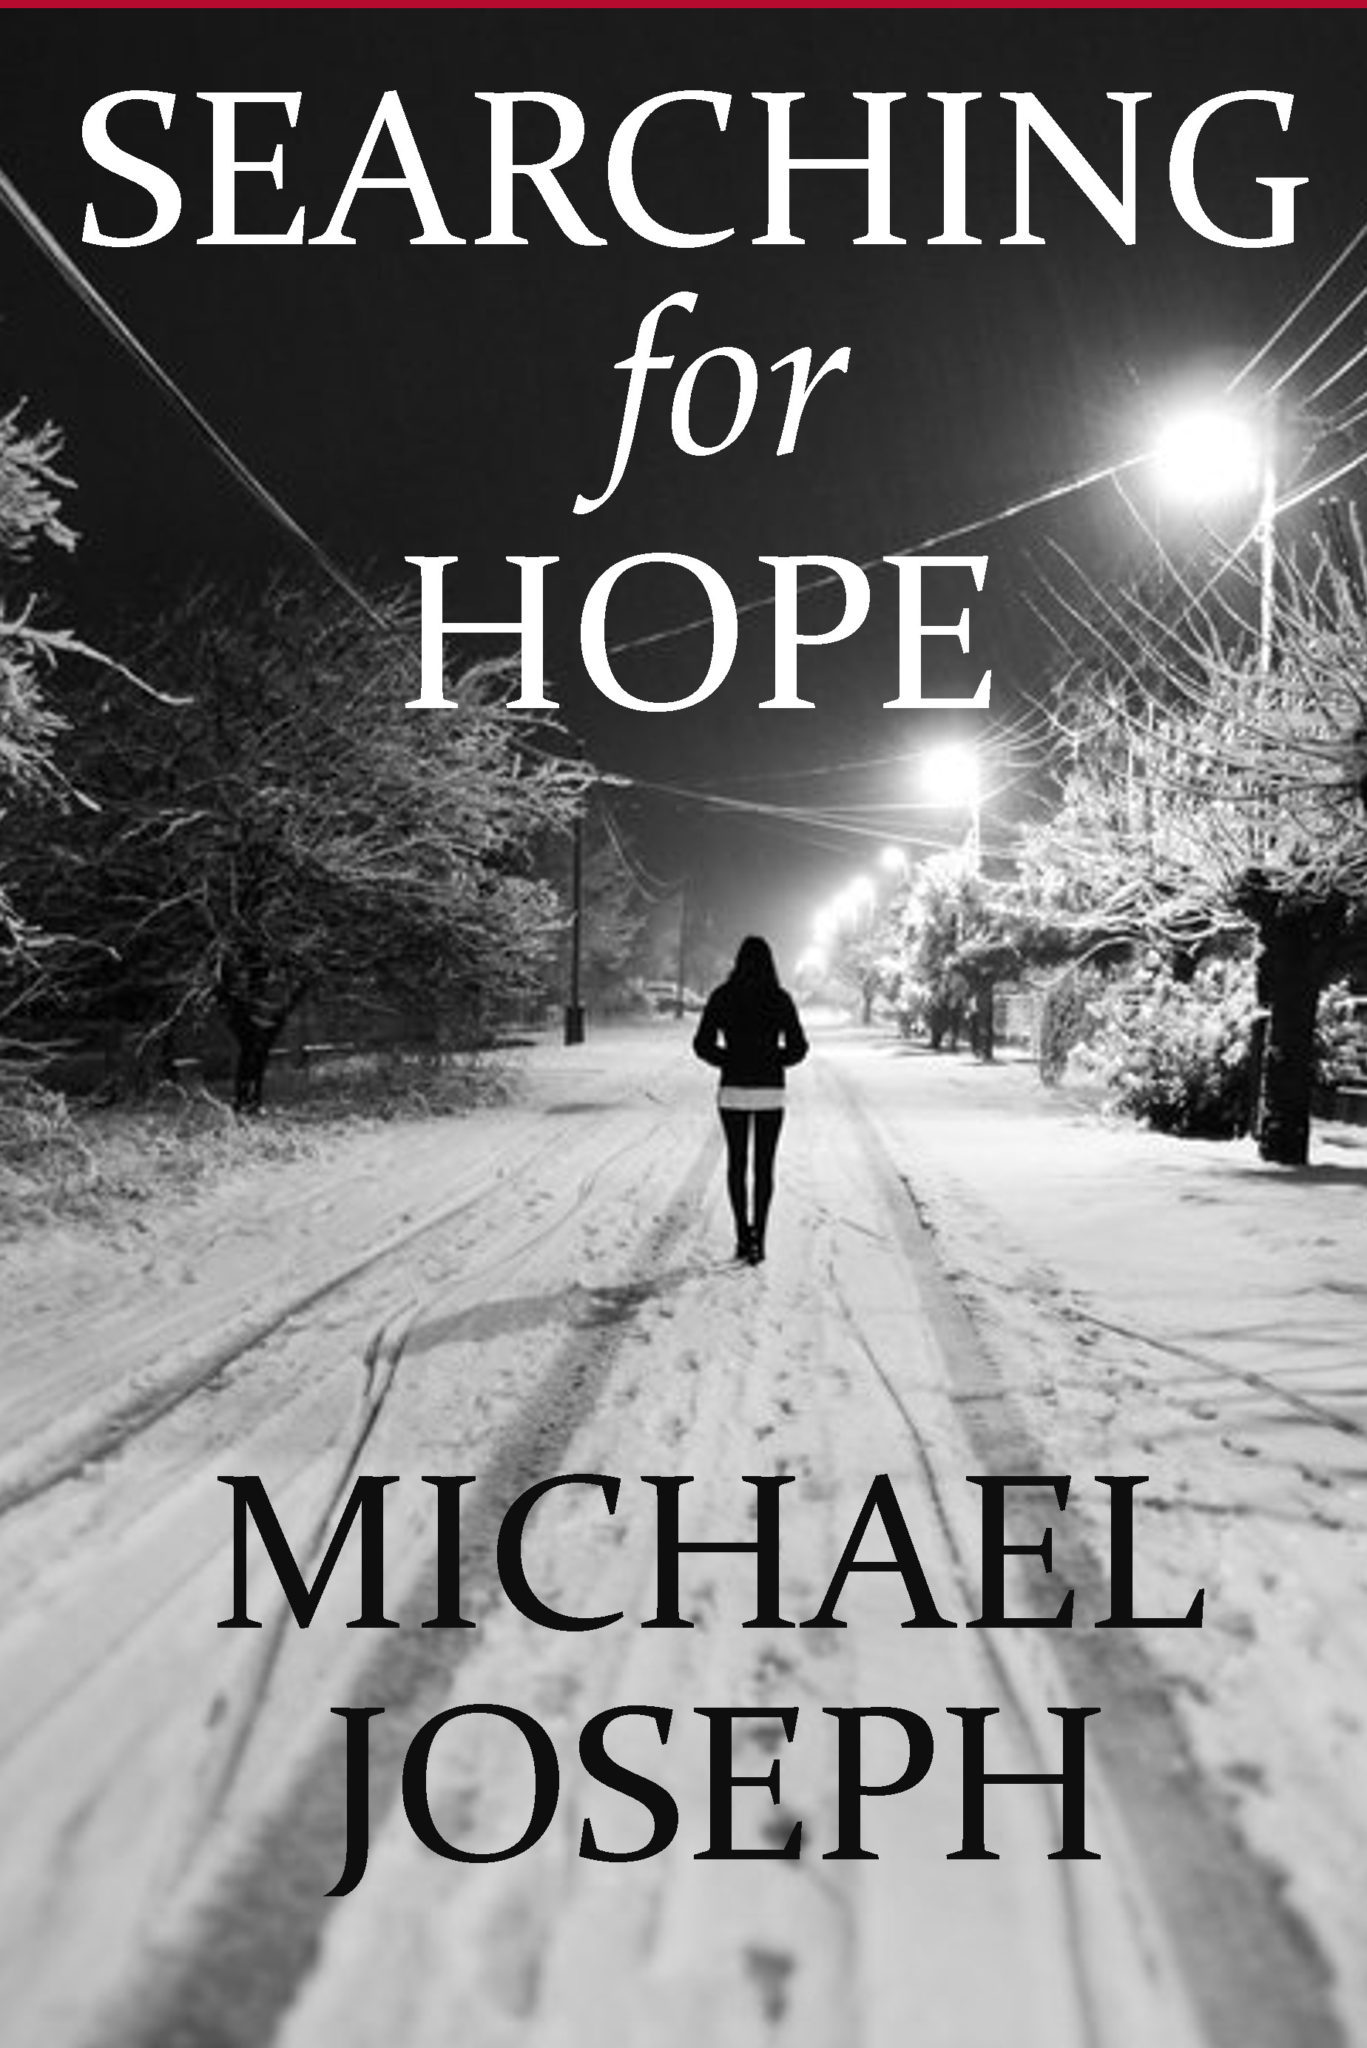 Searching For Hope by Michael Joseph